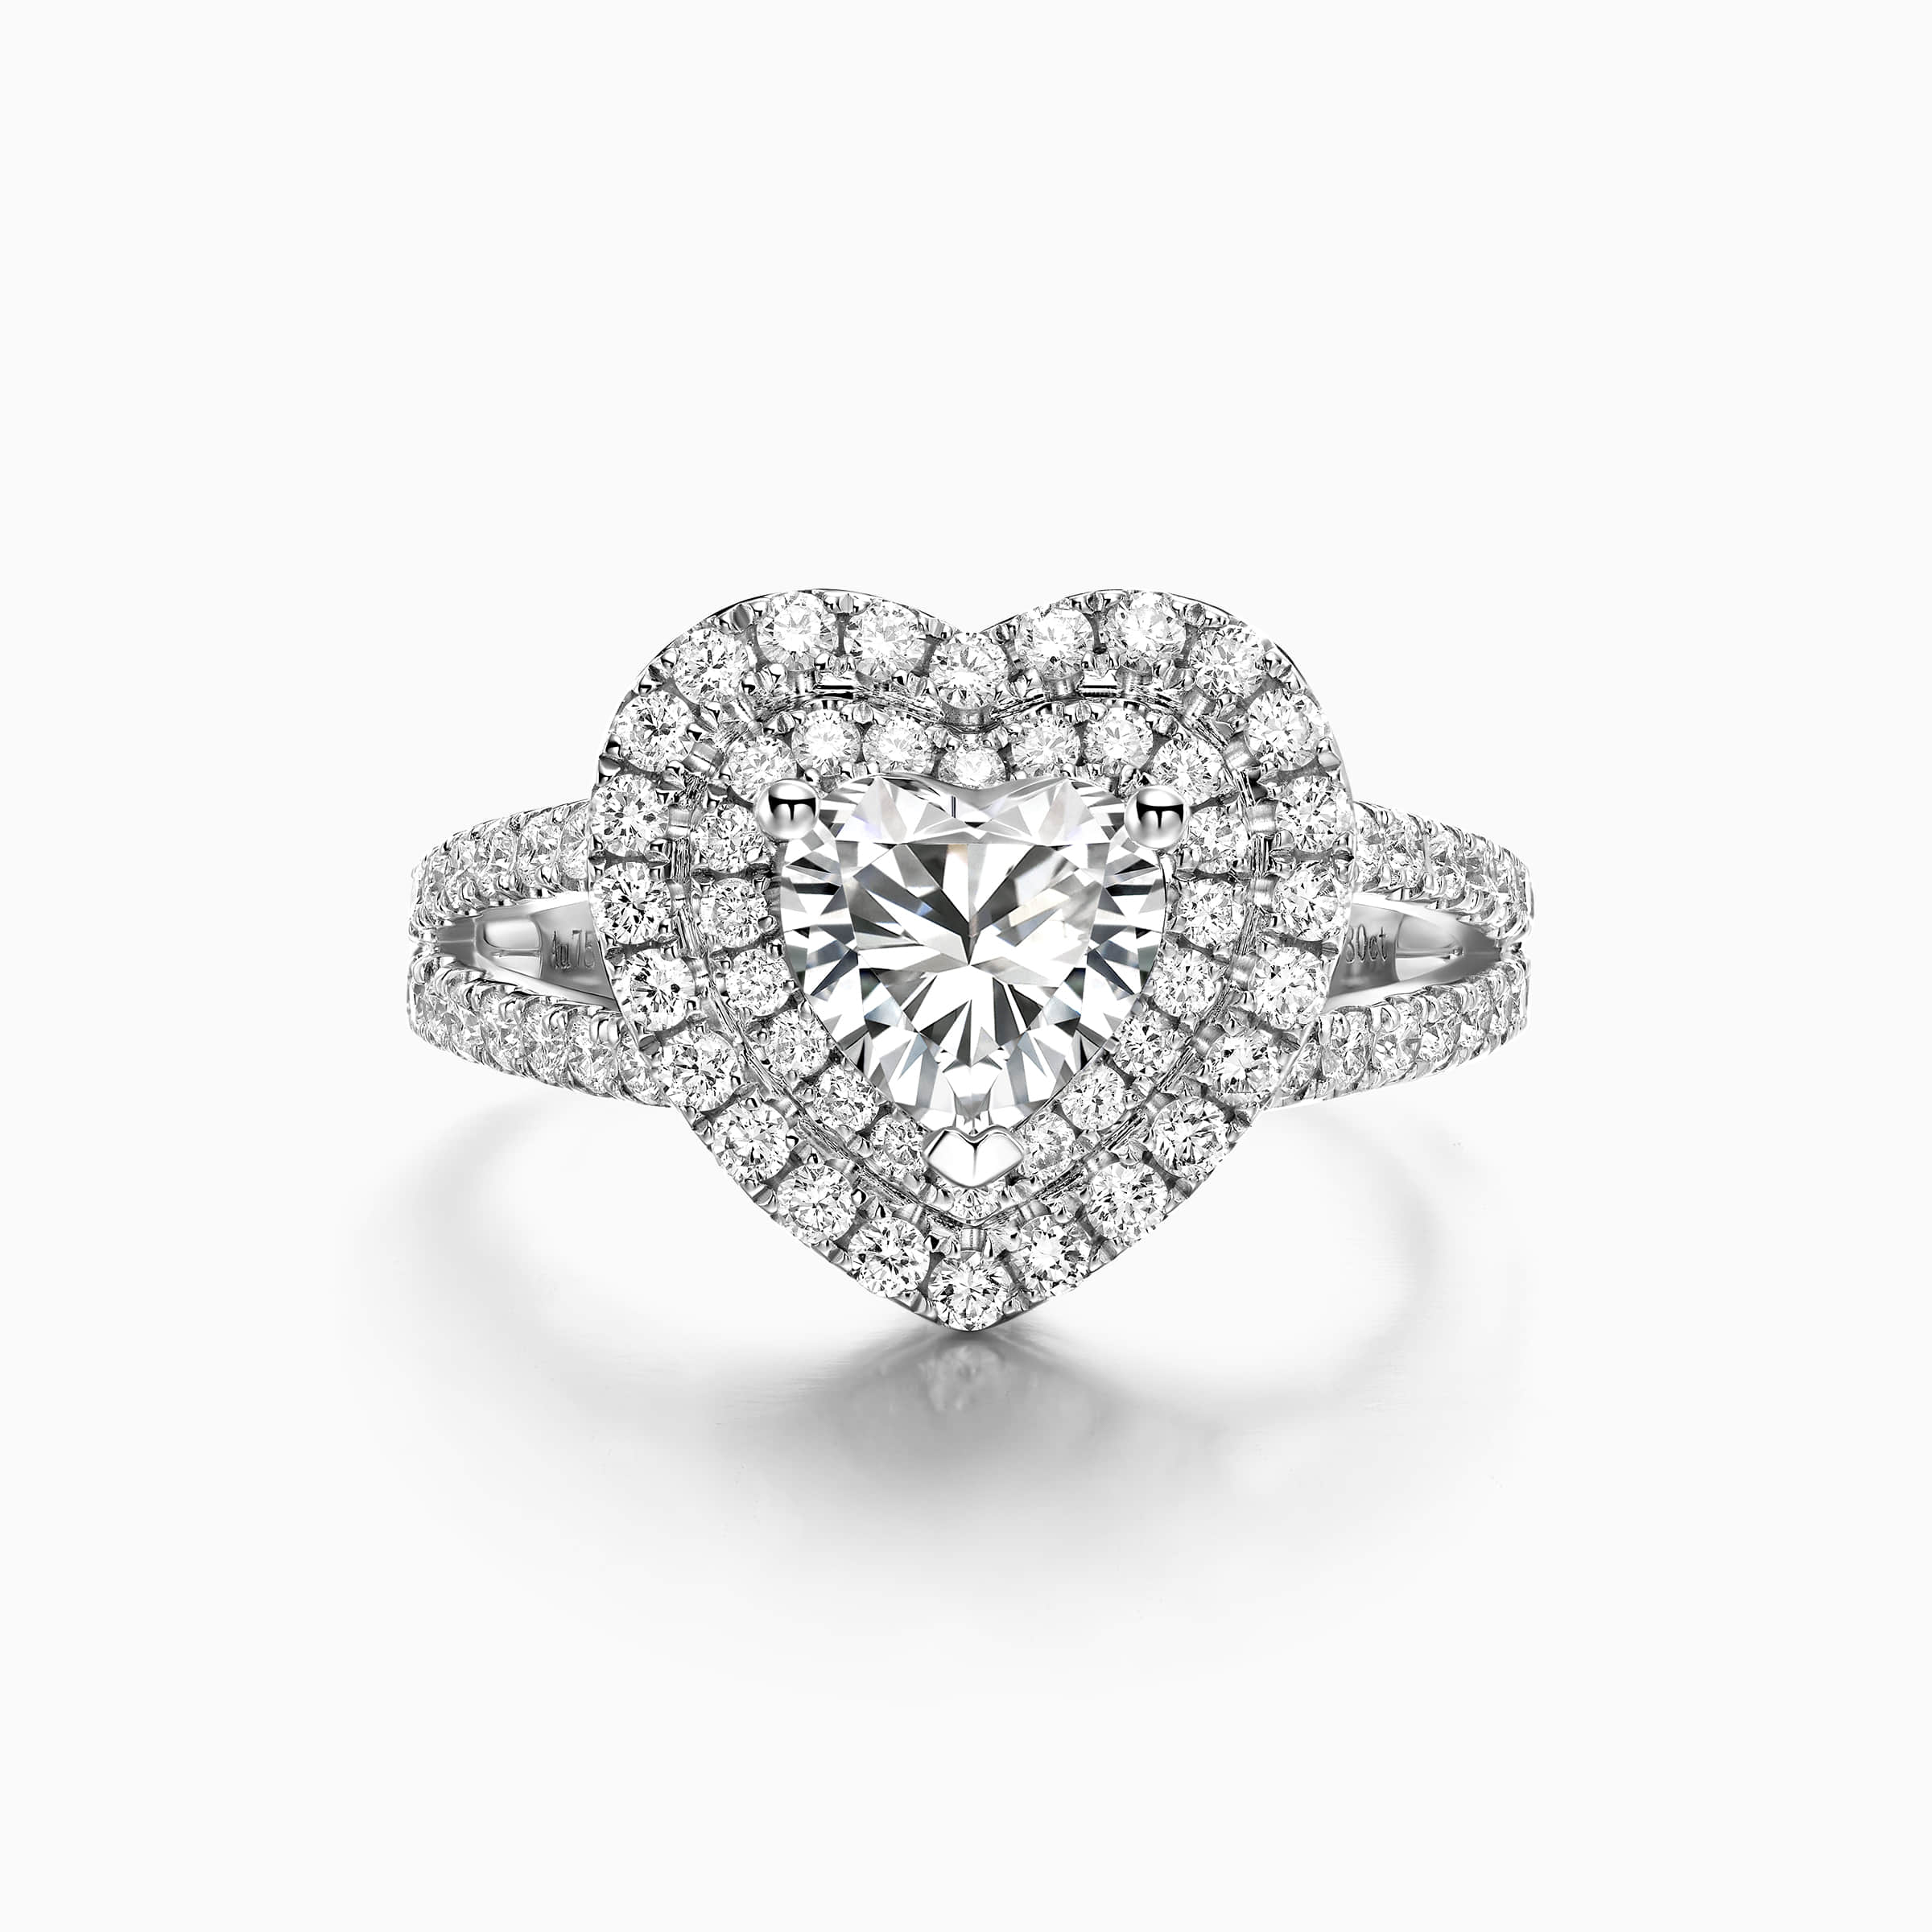 DR double halo heart shped engagement ring